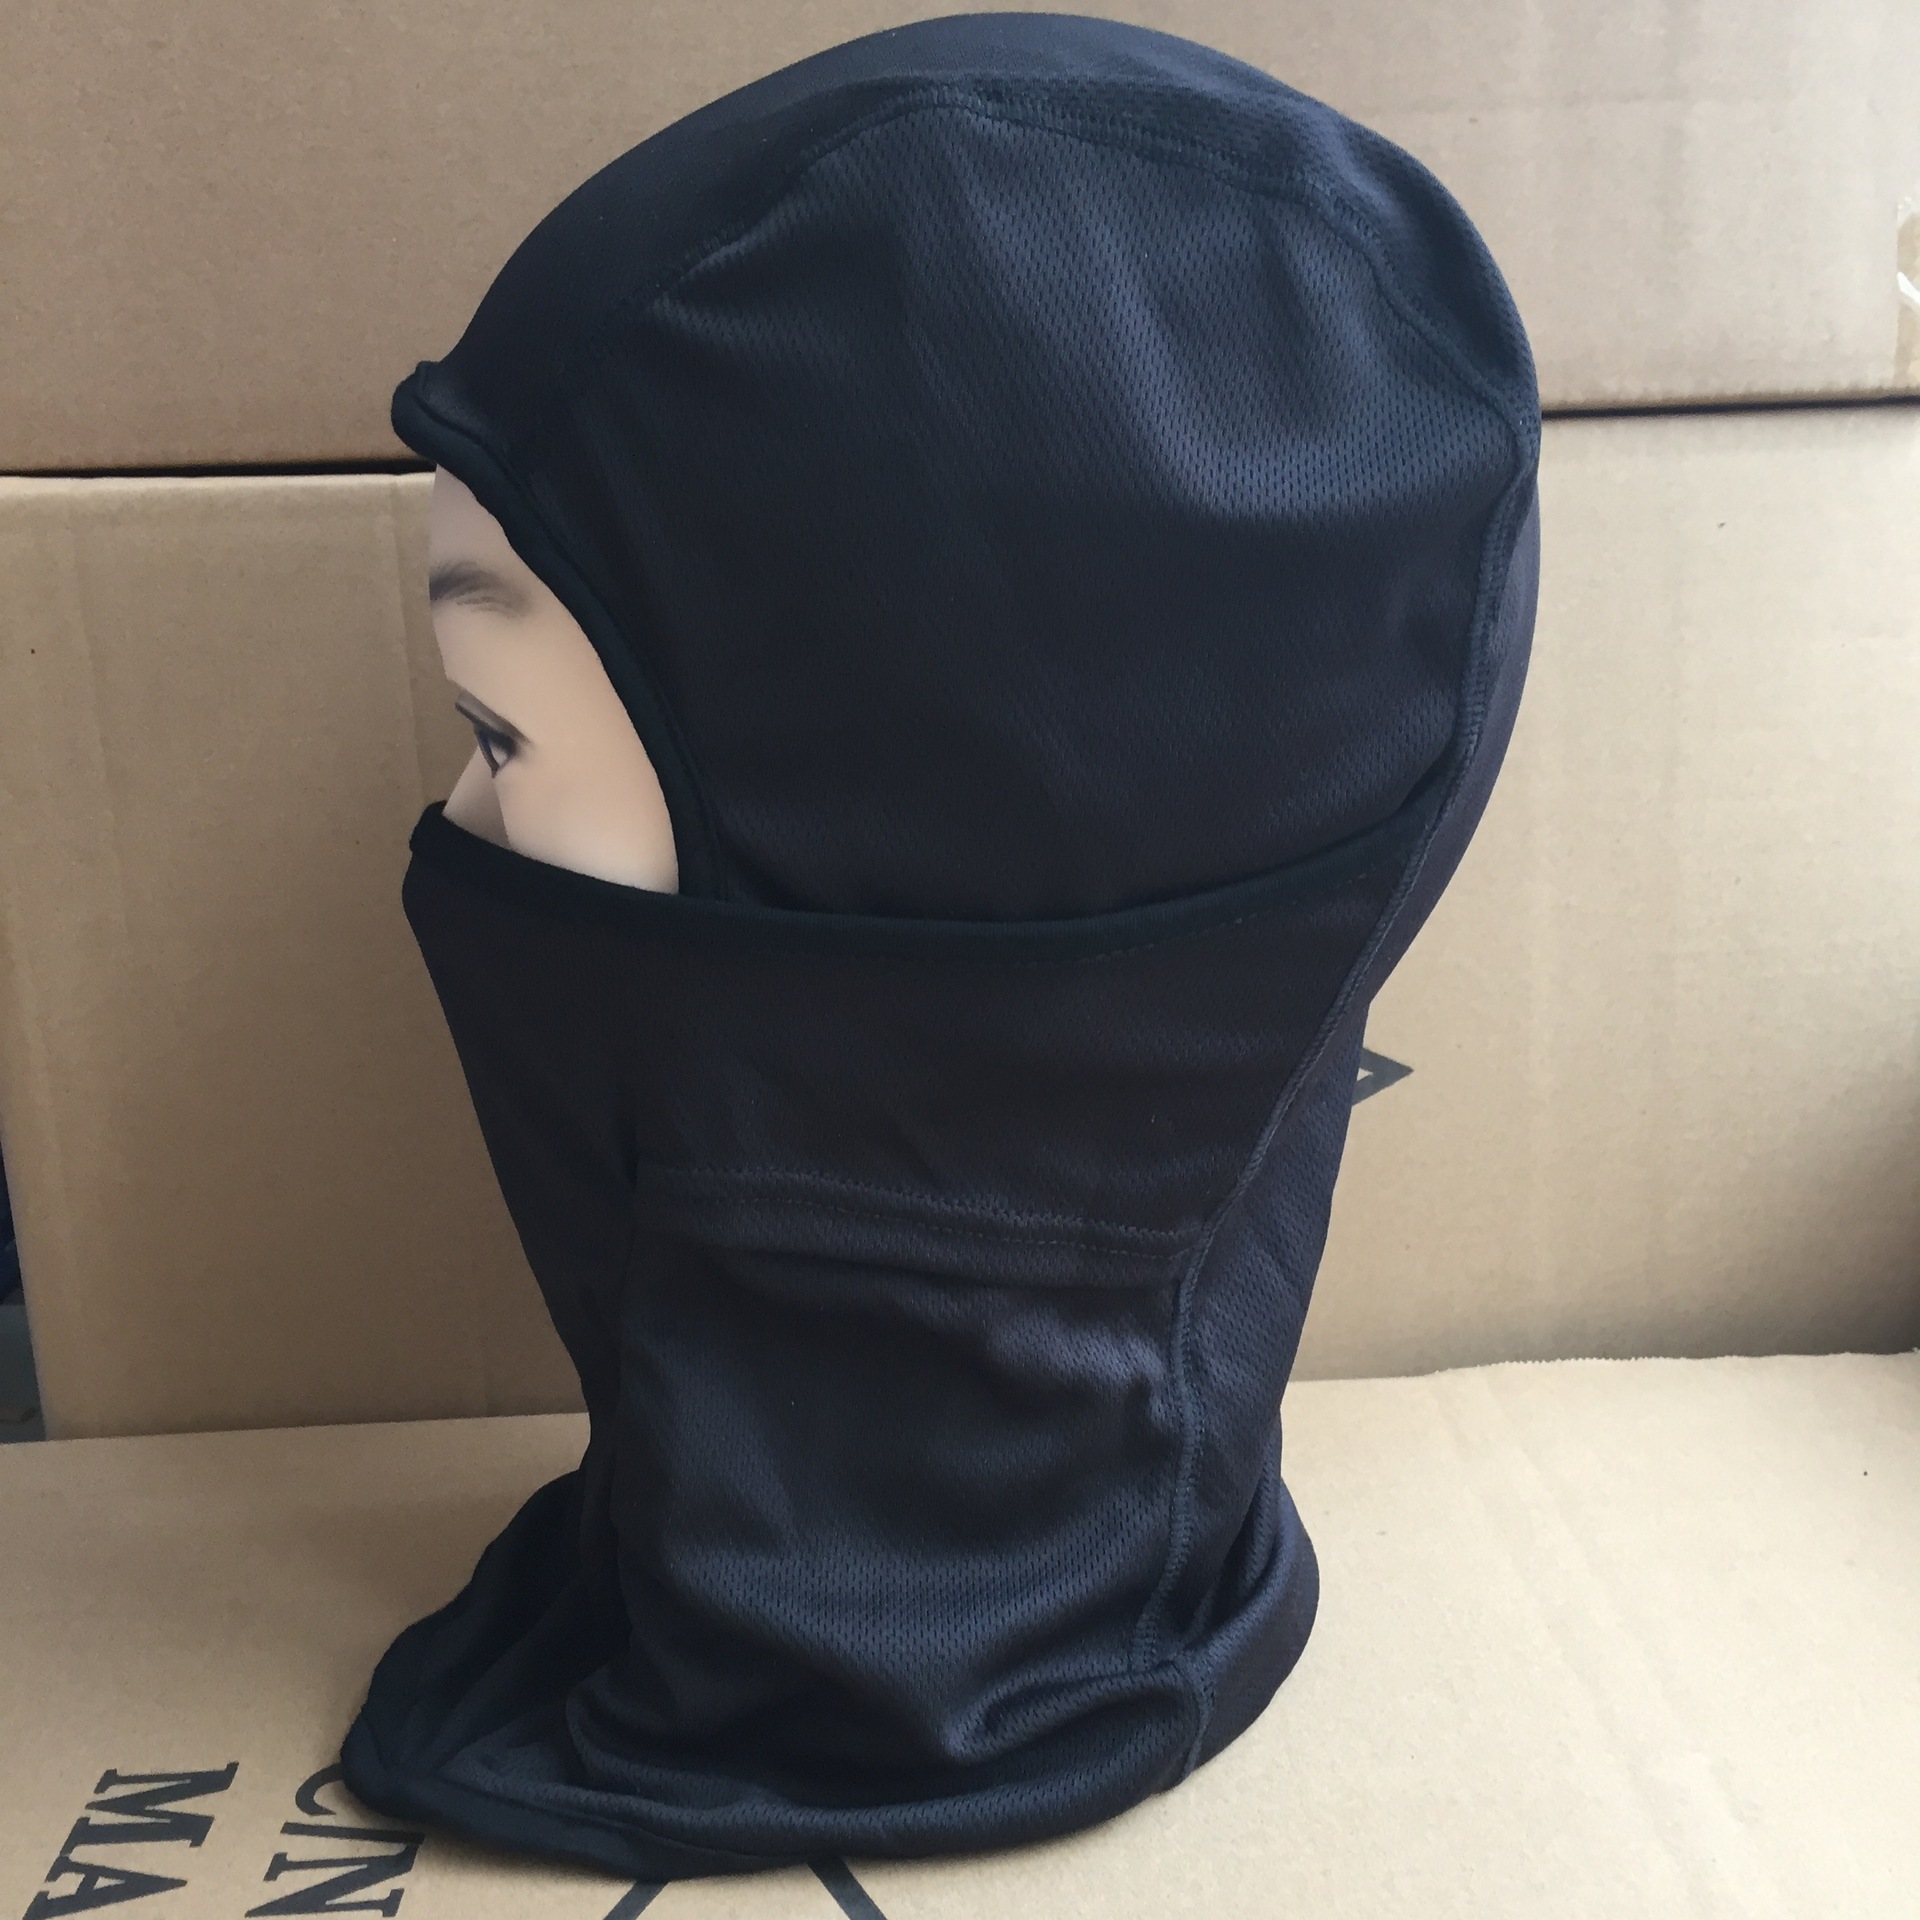 Ultimate-Thermal-Retention-Windproof-Ski-Tactical-Mask-Cold-Weather-Face-Mask-Neck-Warmer-1241597-9